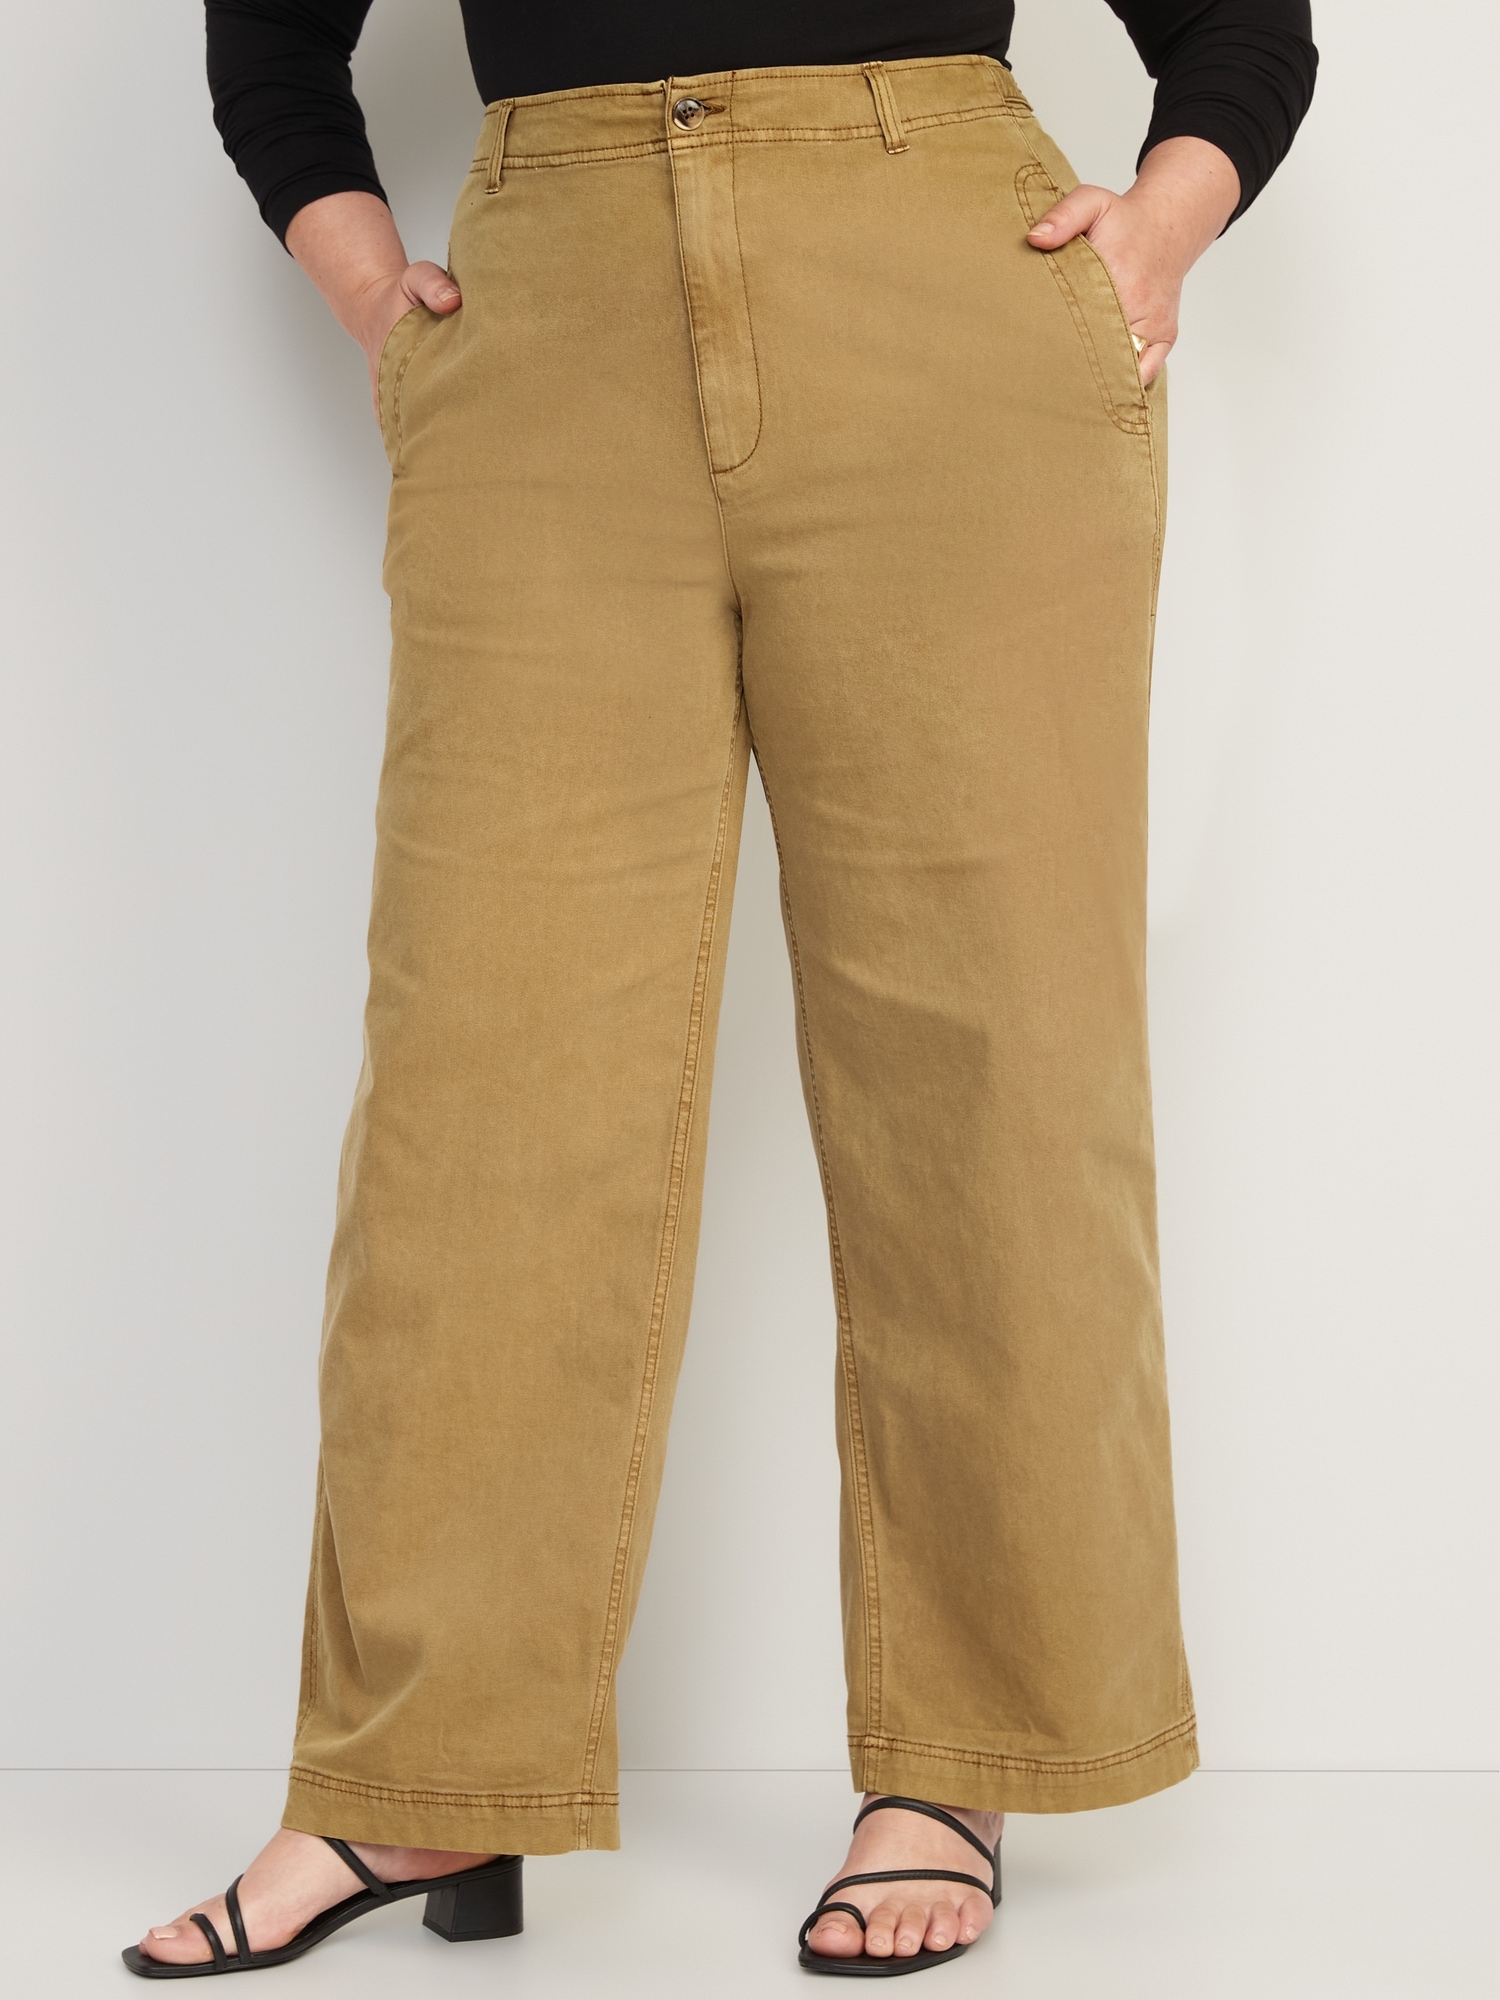 Extra High-Waisted Wide-Leg Workwear Pants for Women | Old Navy